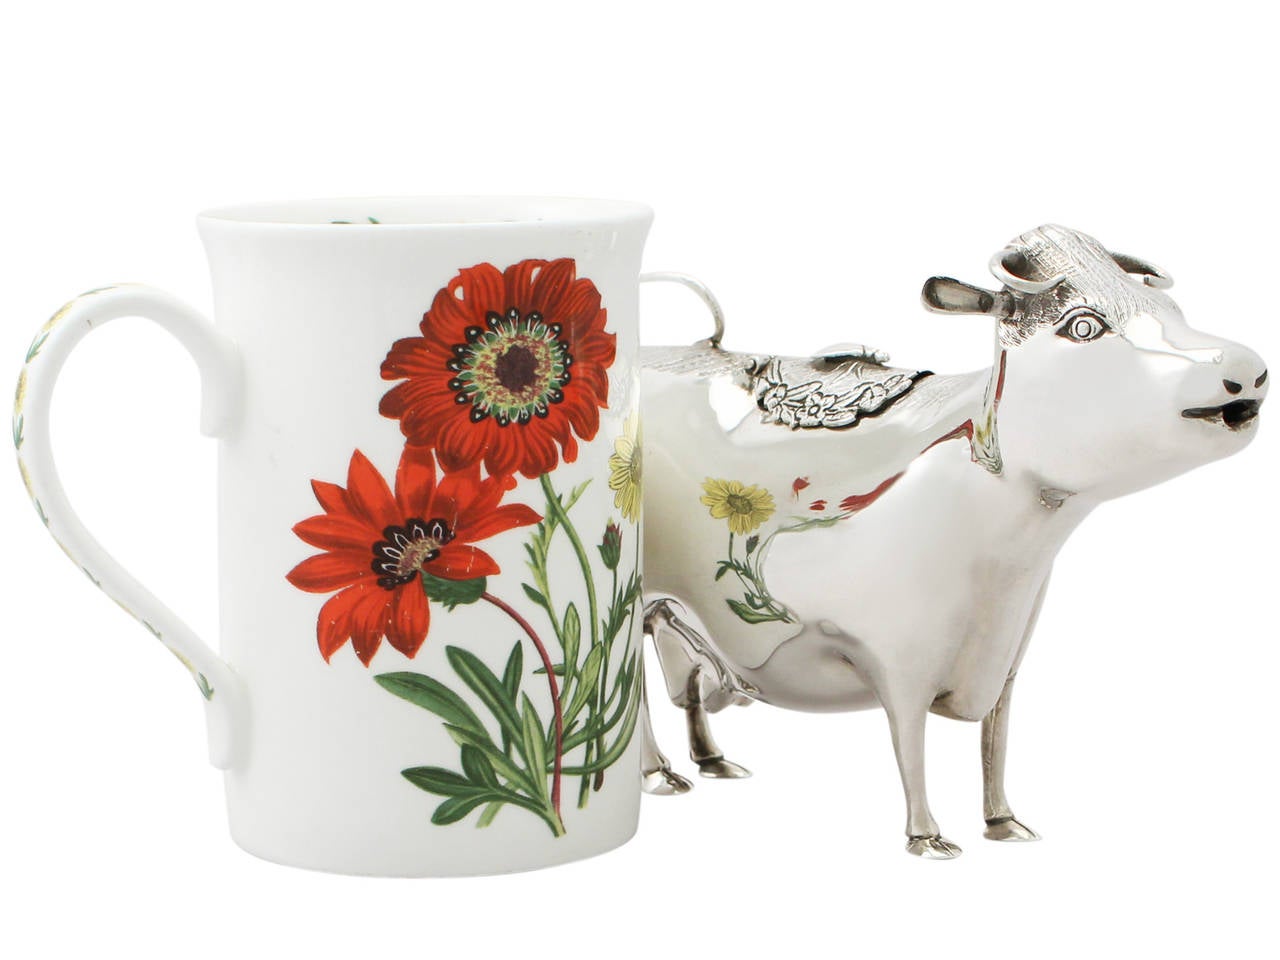 A fine and impressive vintage Elizabeth II English sterling silver cow creamer made in 18th century style; an addition to our silver teaware collection.

This vintage Elizabeth II sterling silver cow creamer has been modeled in the style of an